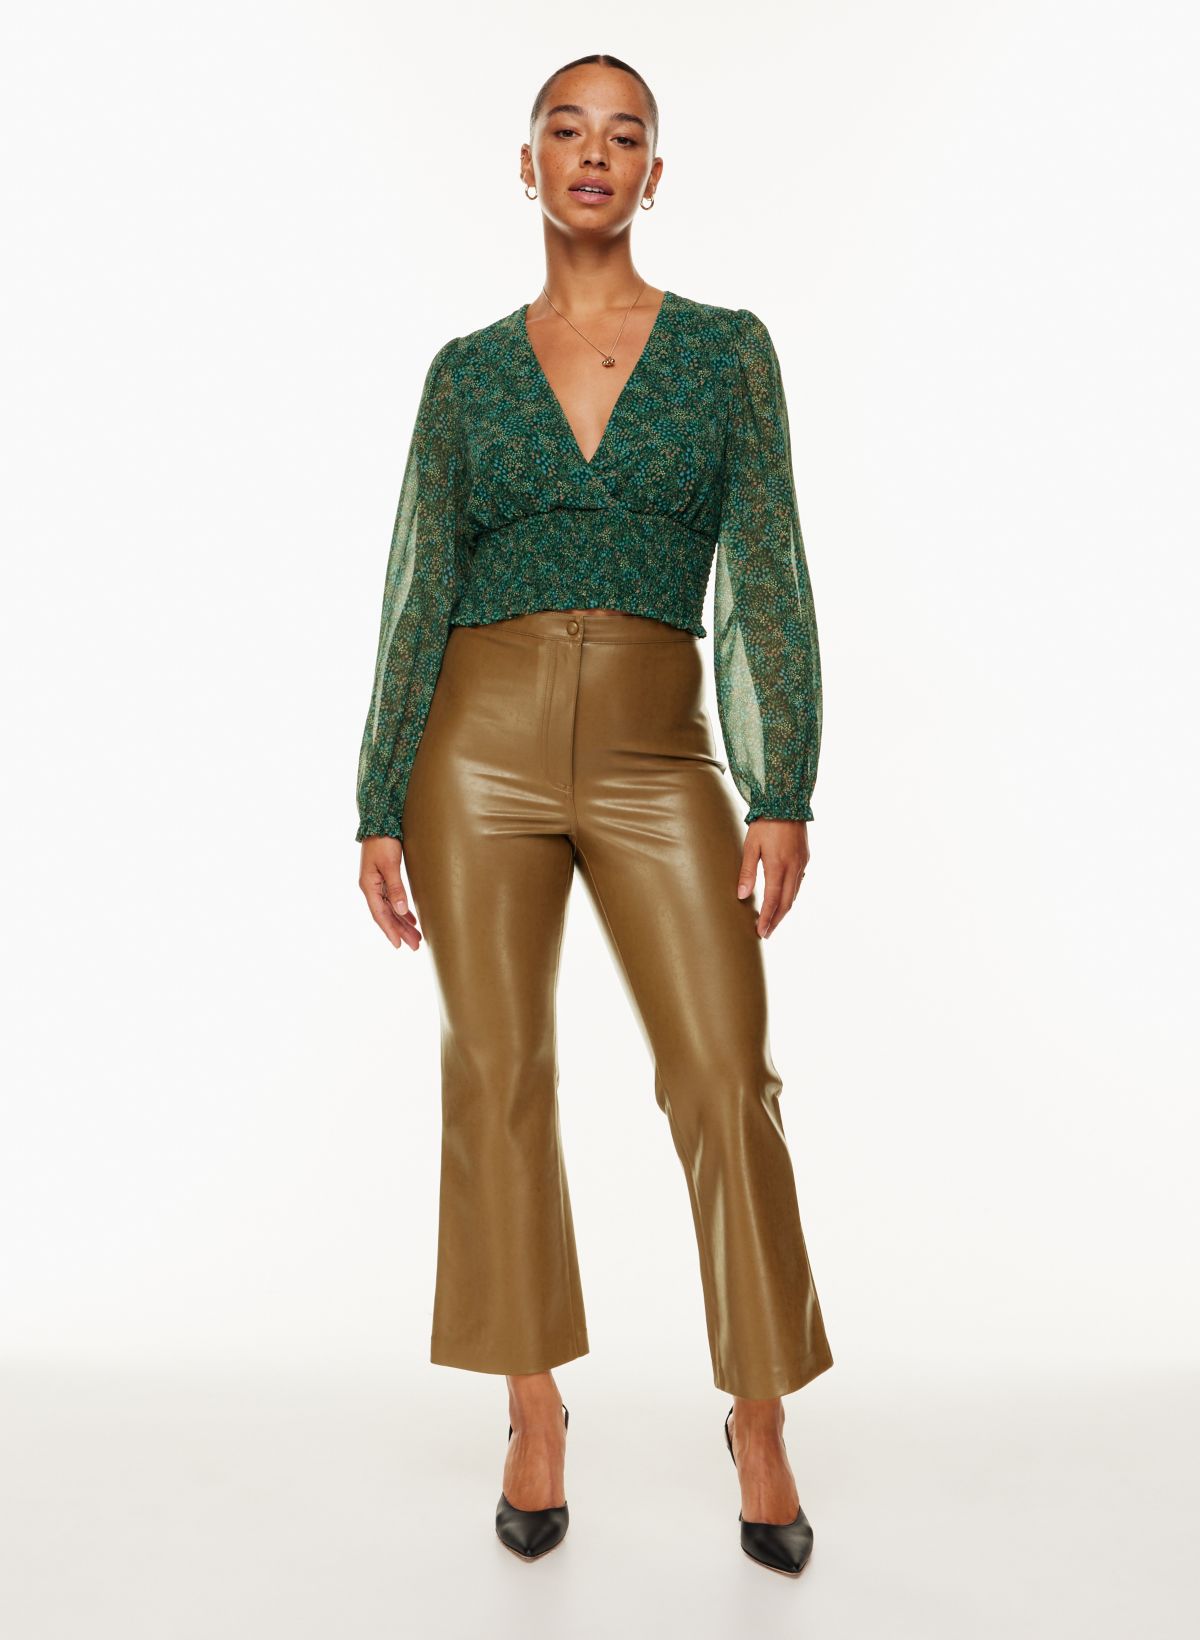 Size 2 in effortless pants, what size should I get in the Melinas? :  r/Aritzia